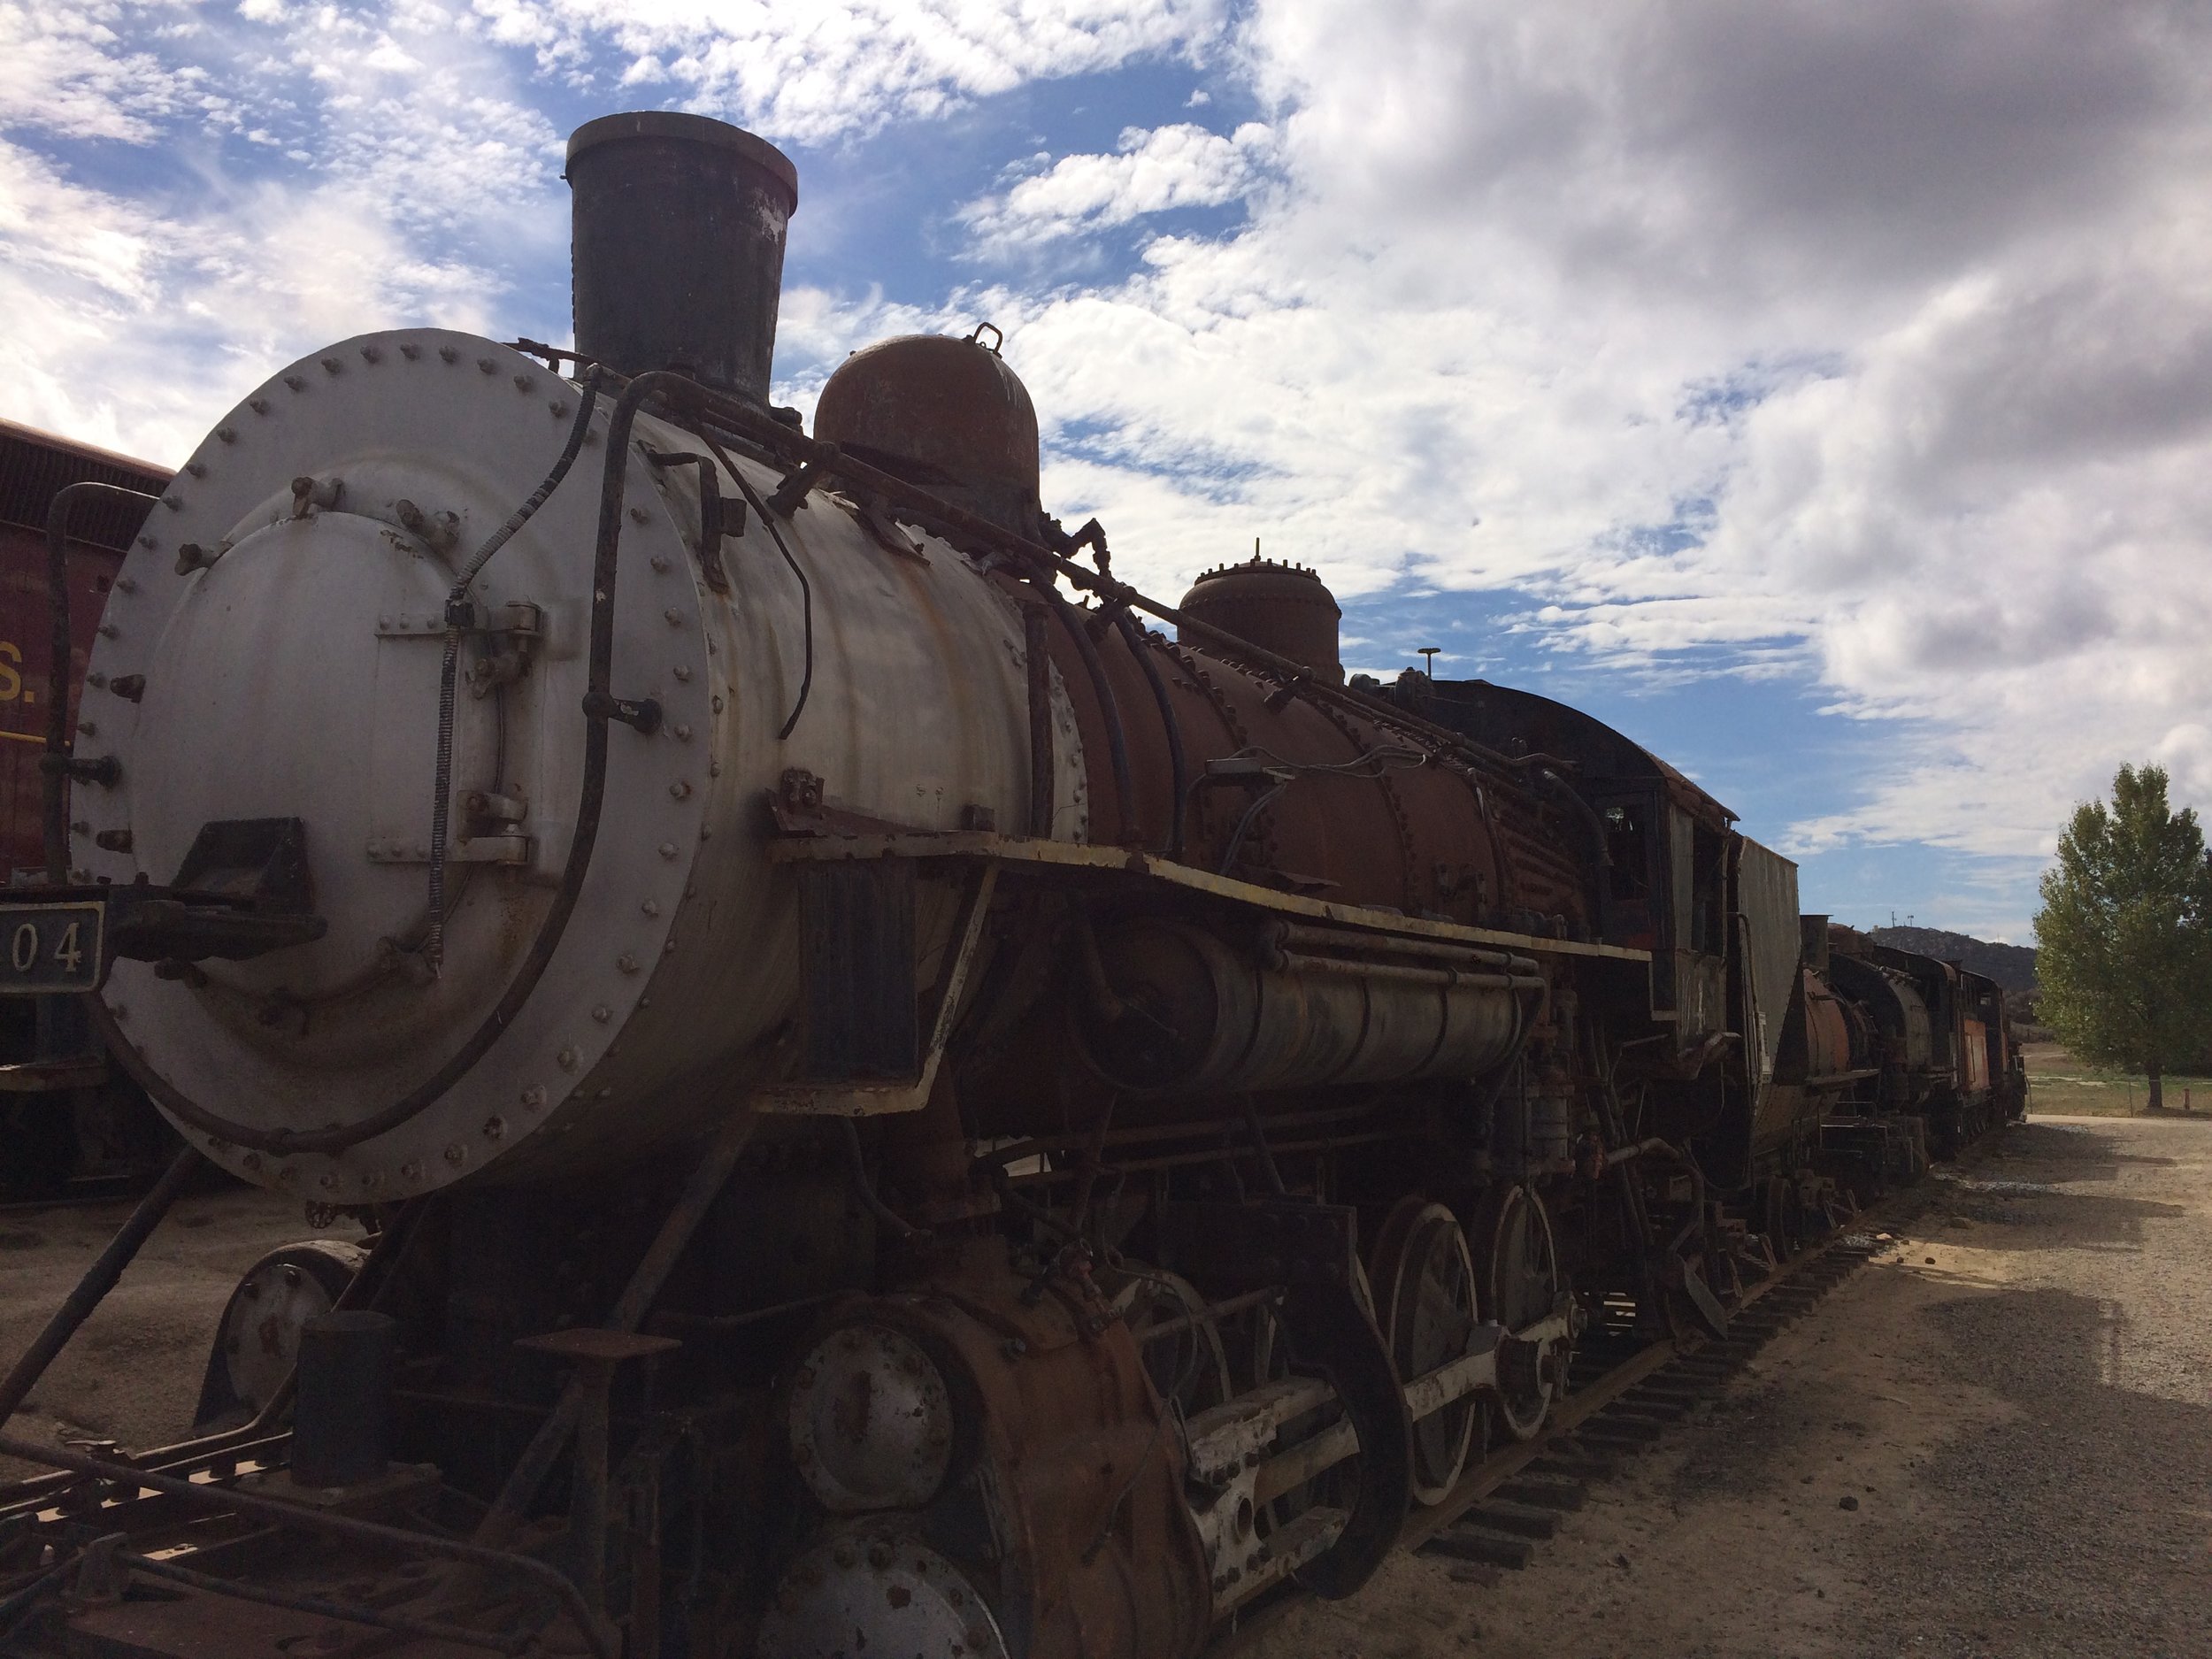 Historic Coaster Locomotive 2103 Arrives at Campo – Pacific Southwest  Railway Museum